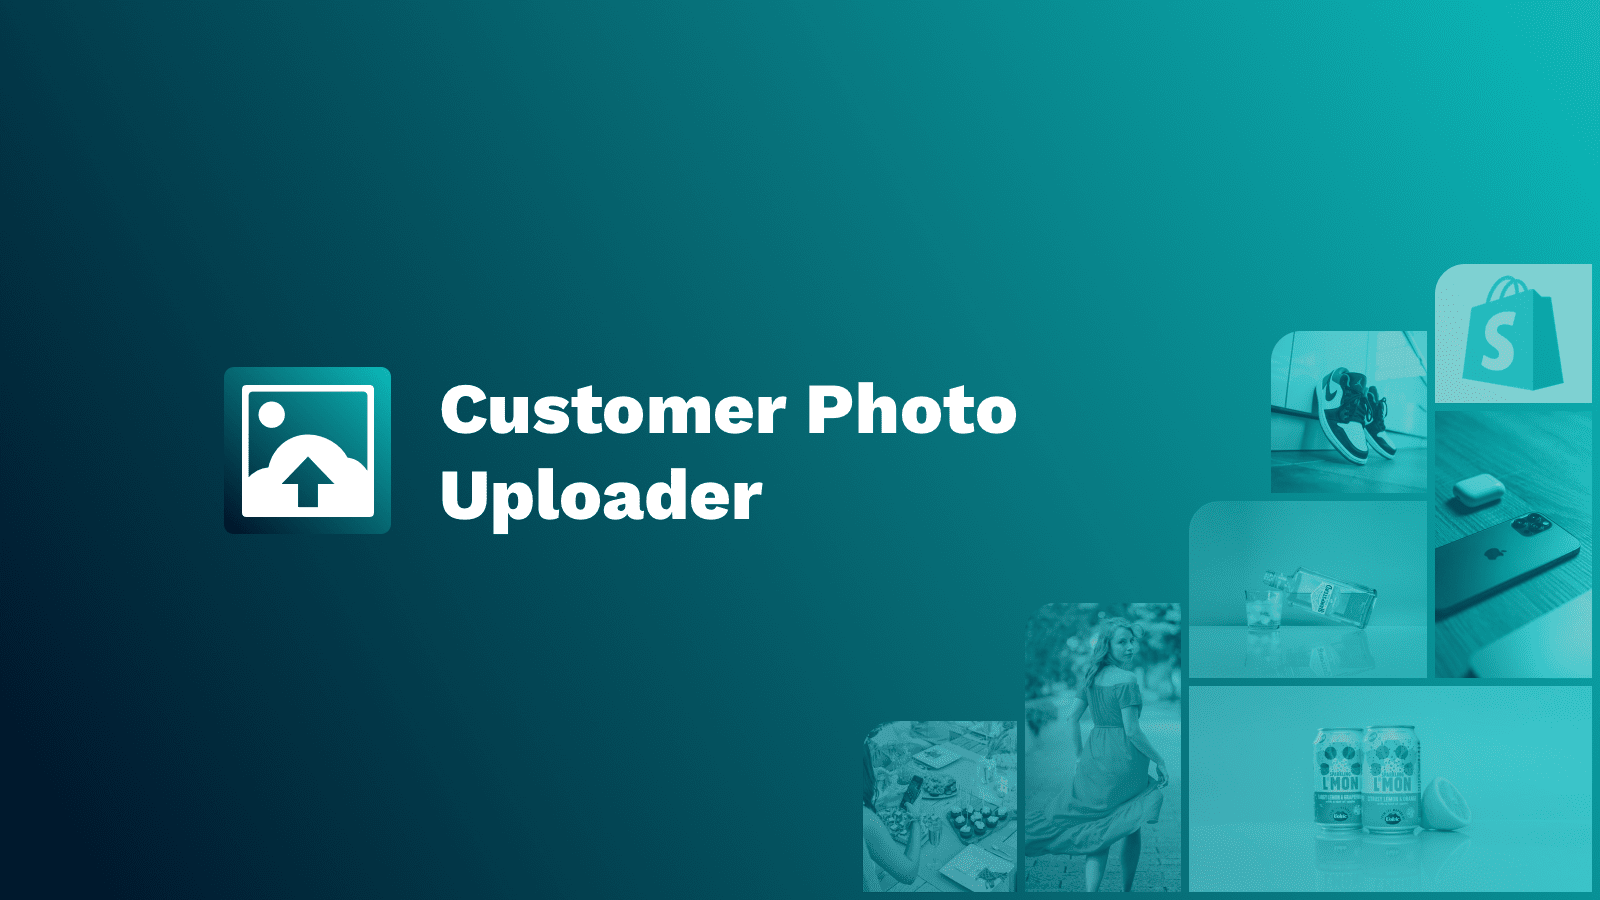 Customer photo uploader app for images created by customers